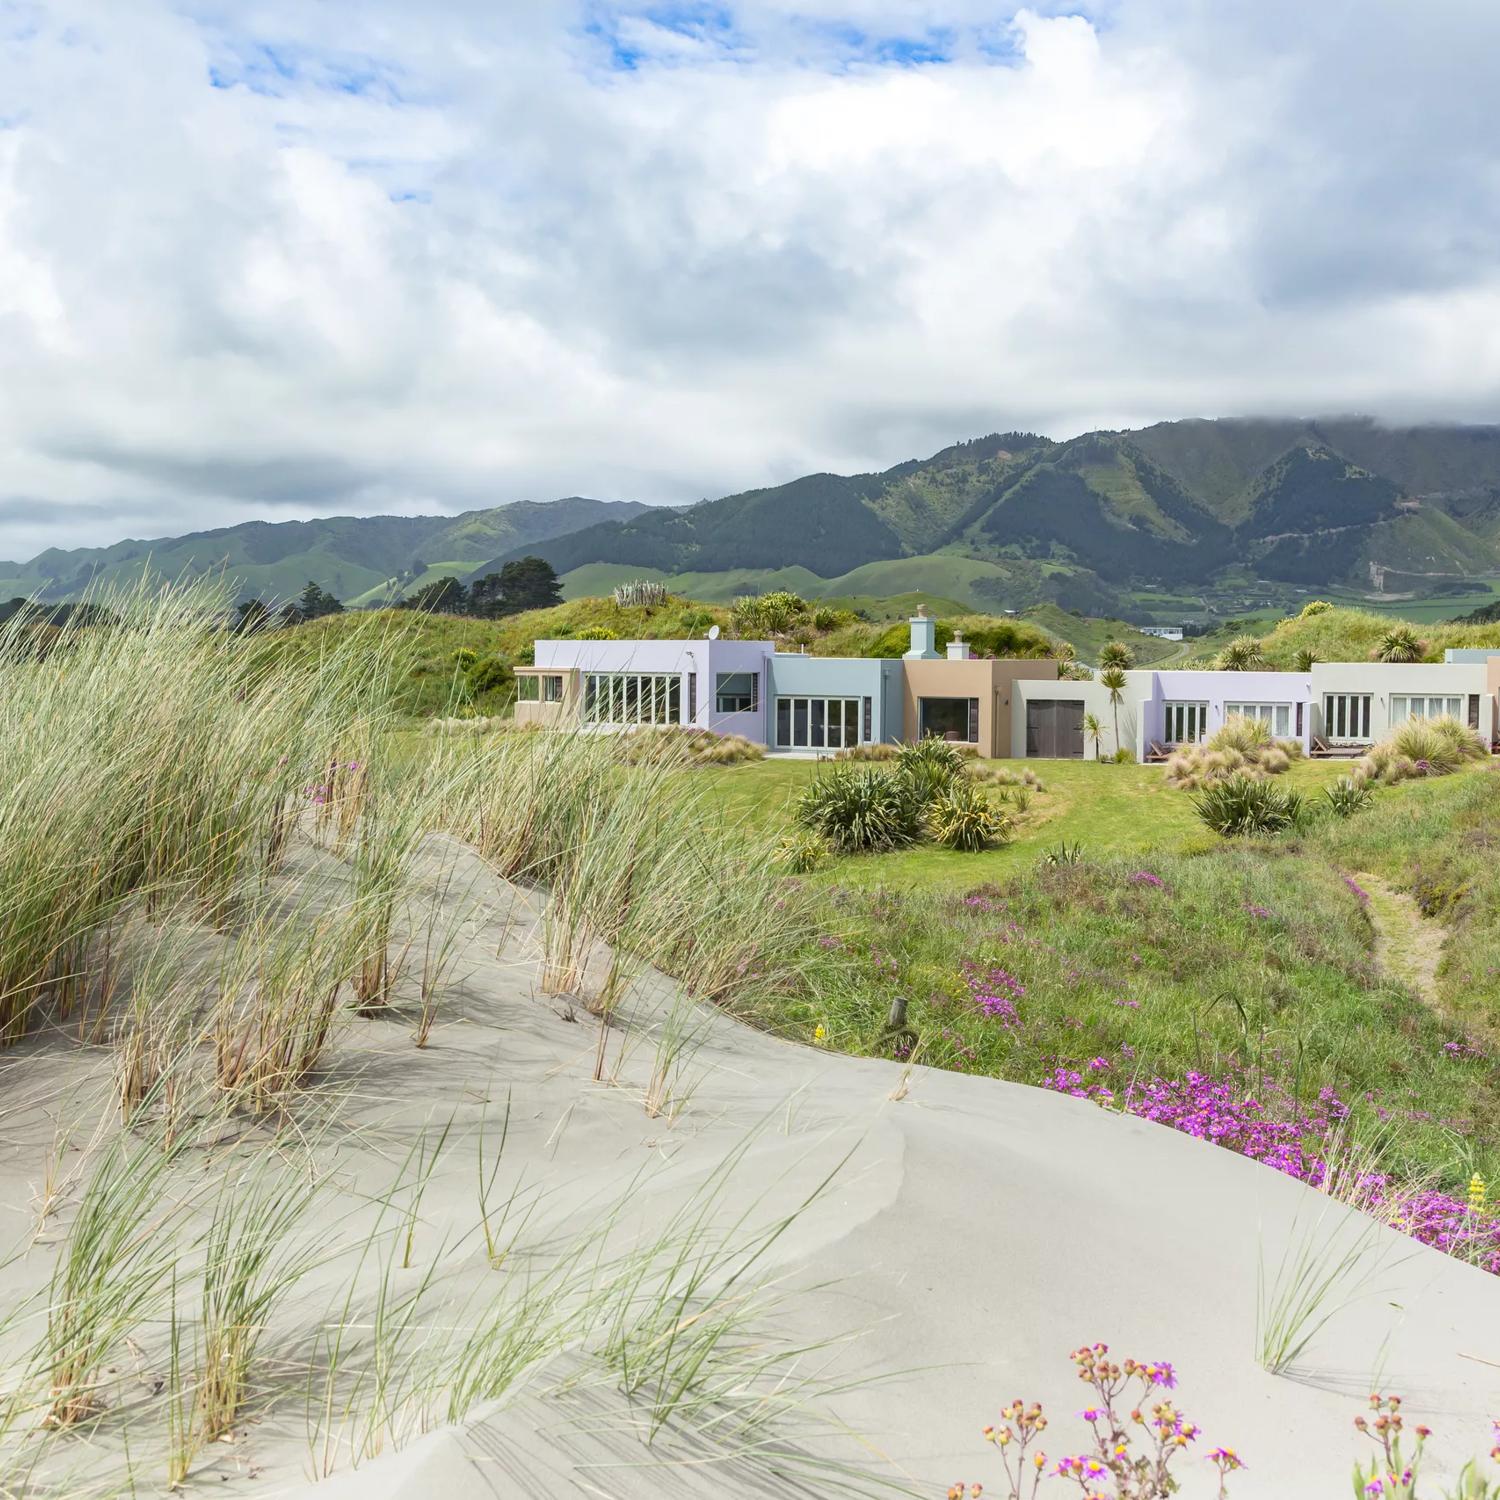 On the sand dunes looking over to Atahuri Lodge on the Kāpiti Coast, with mountains in the background.